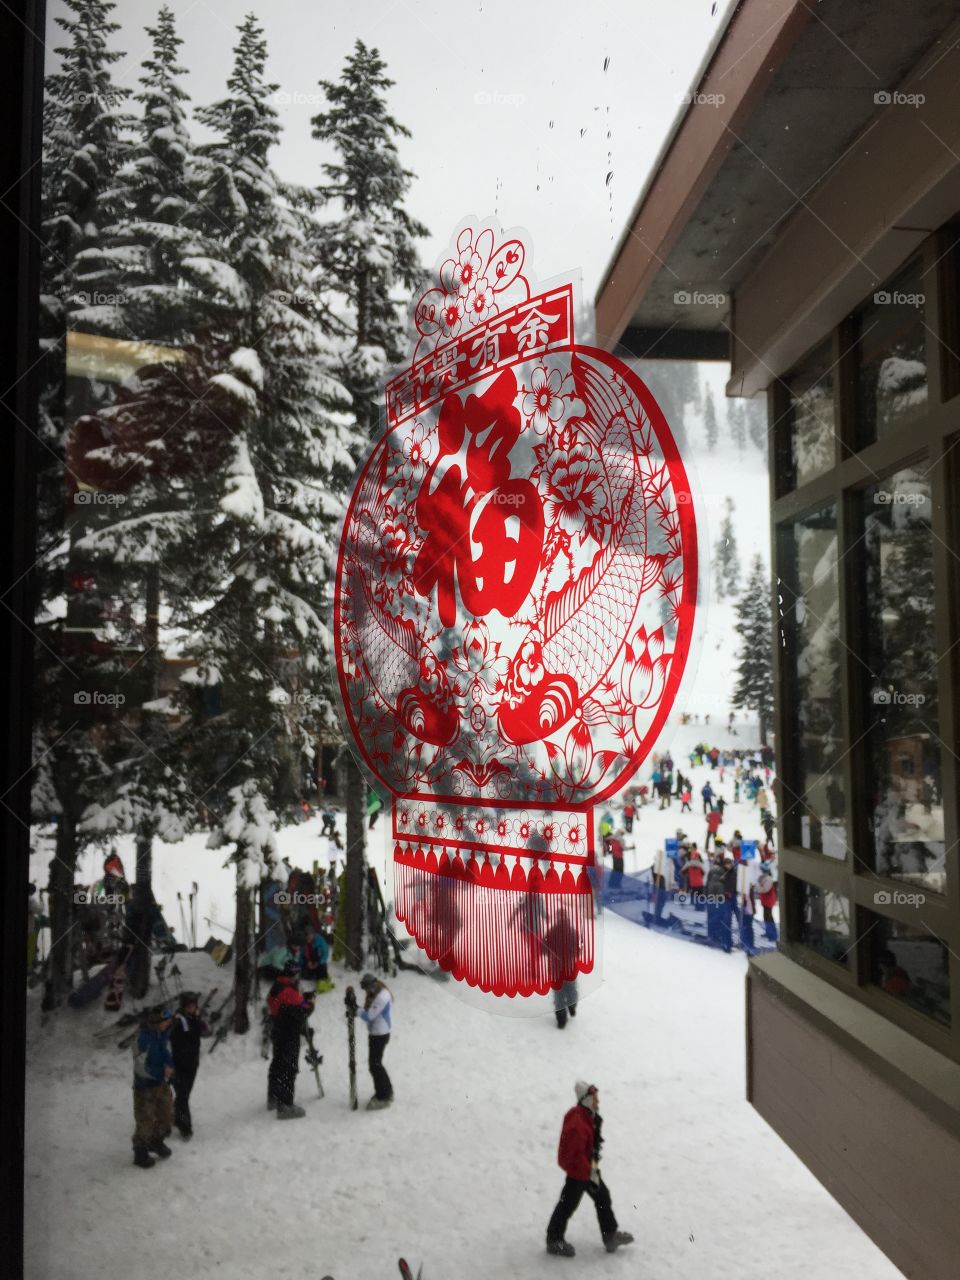 mountain, snow mountain, evergreen trees, snow, snowing. Fog, snowboarding, skiing, sky, 7th heaven , winter, ski resort, Chinese New Year, red decor 